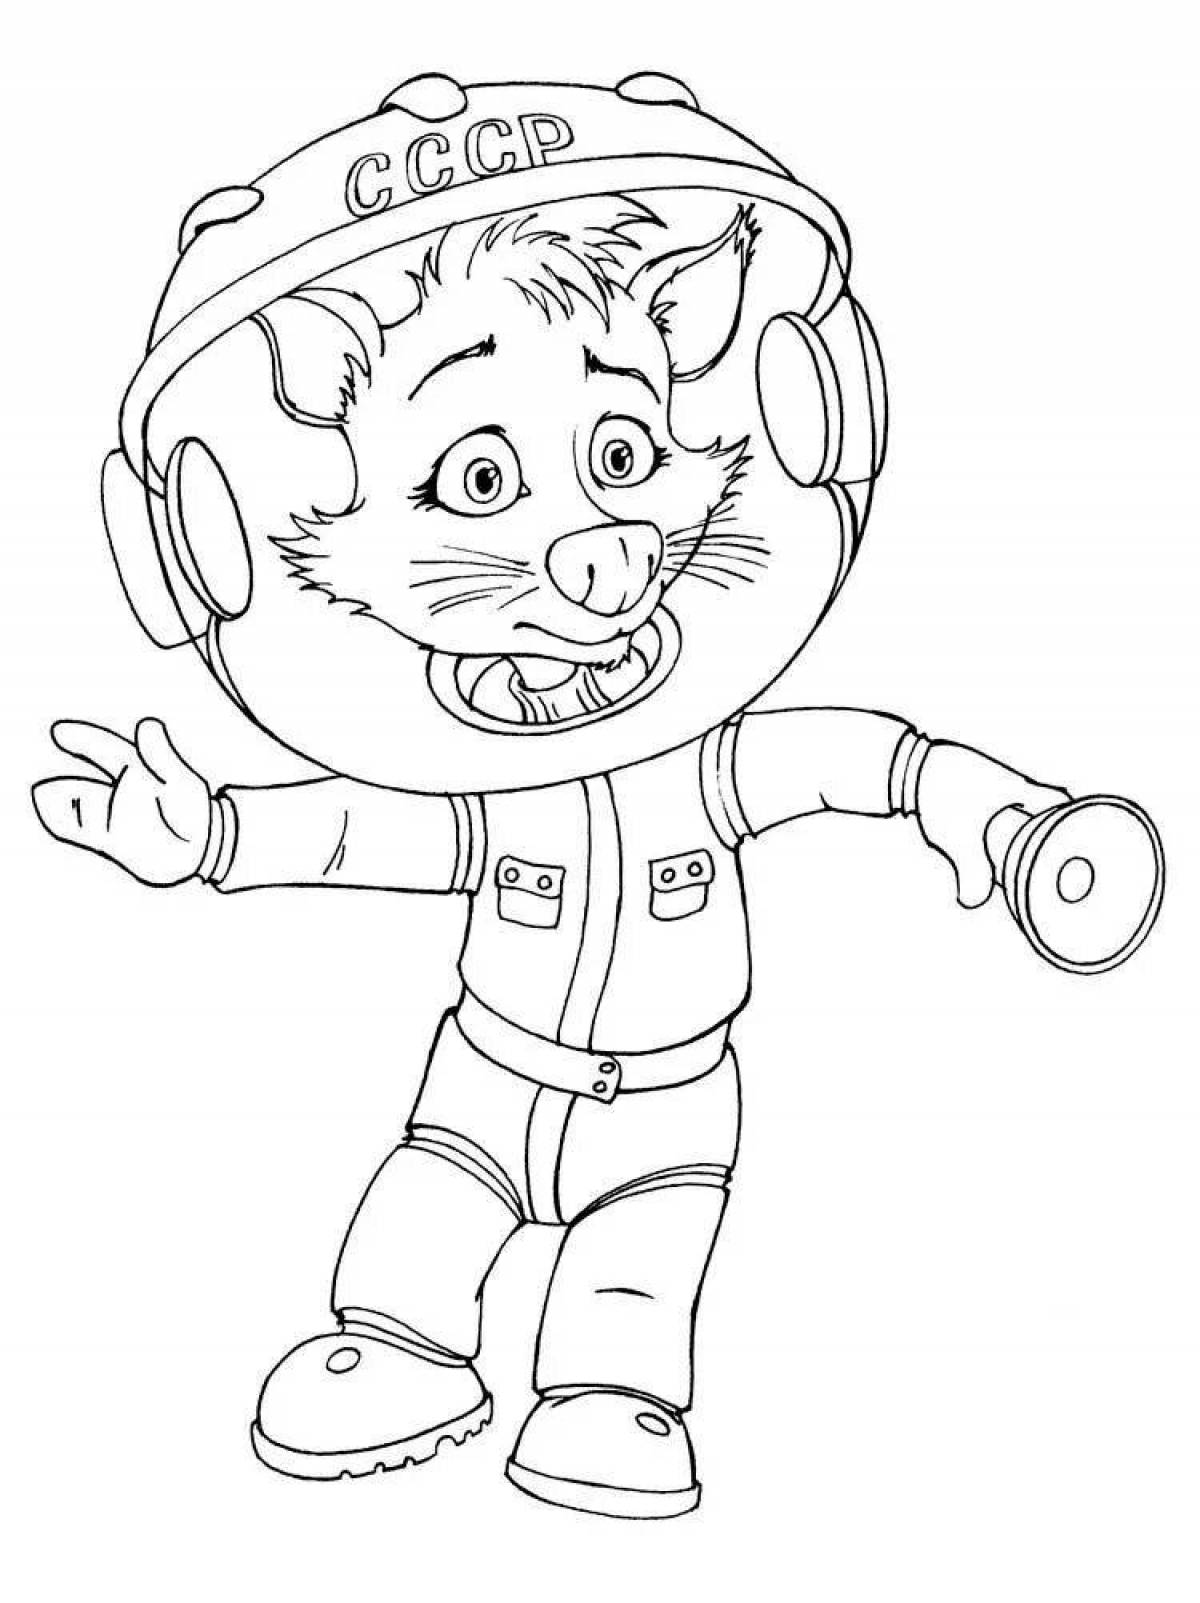 Mysterious space cartoon coloring book